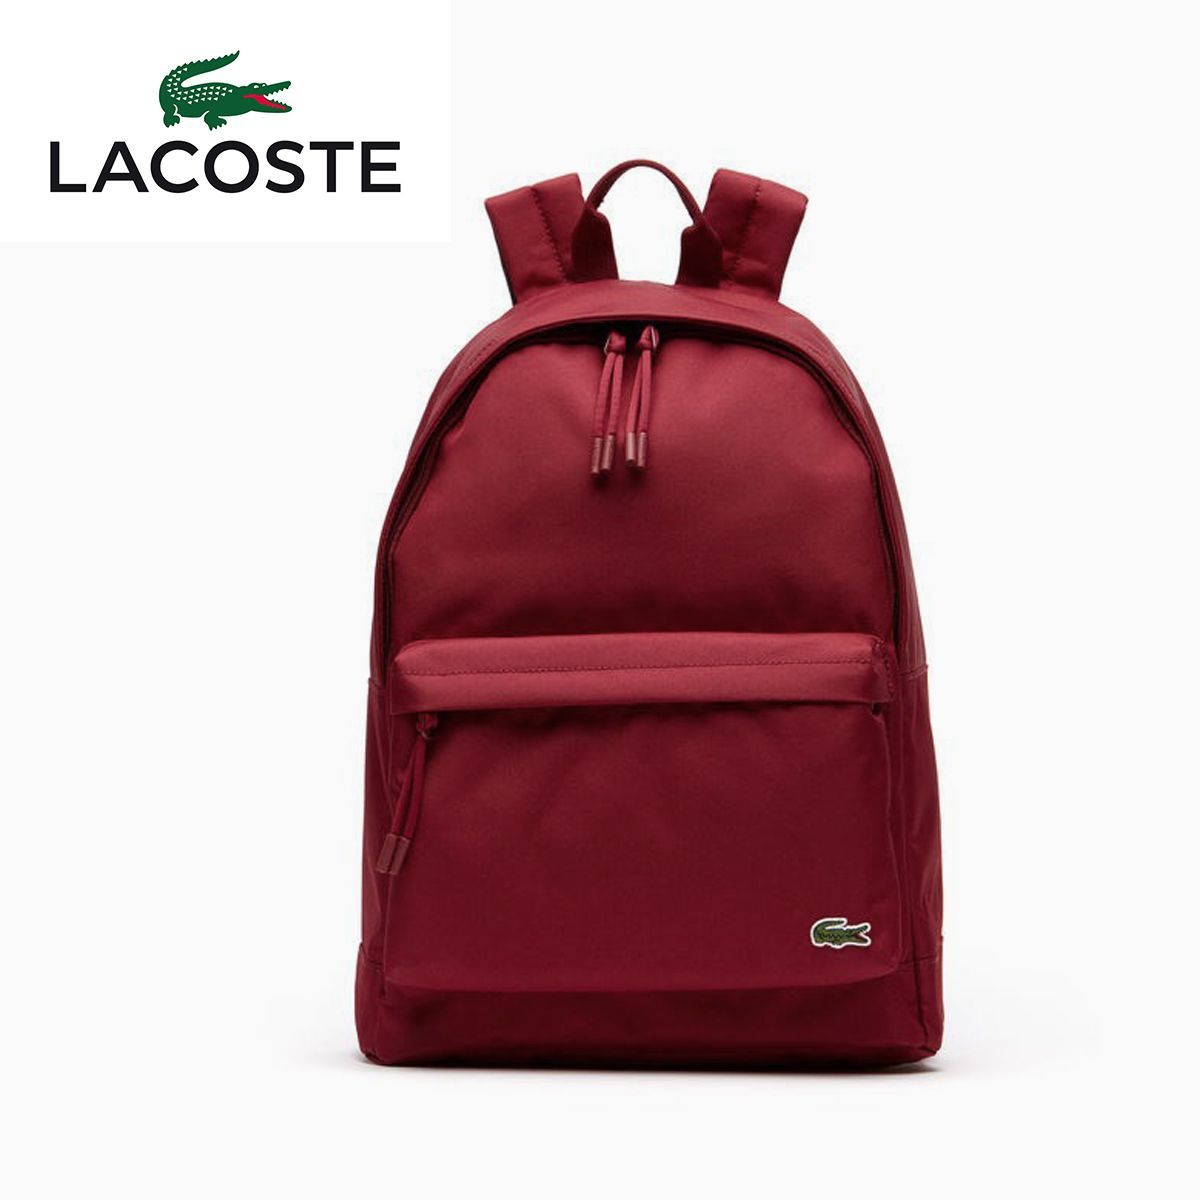 LACOSTE ラコステ バッグ バックパック リュック ナイロン L.12.12 